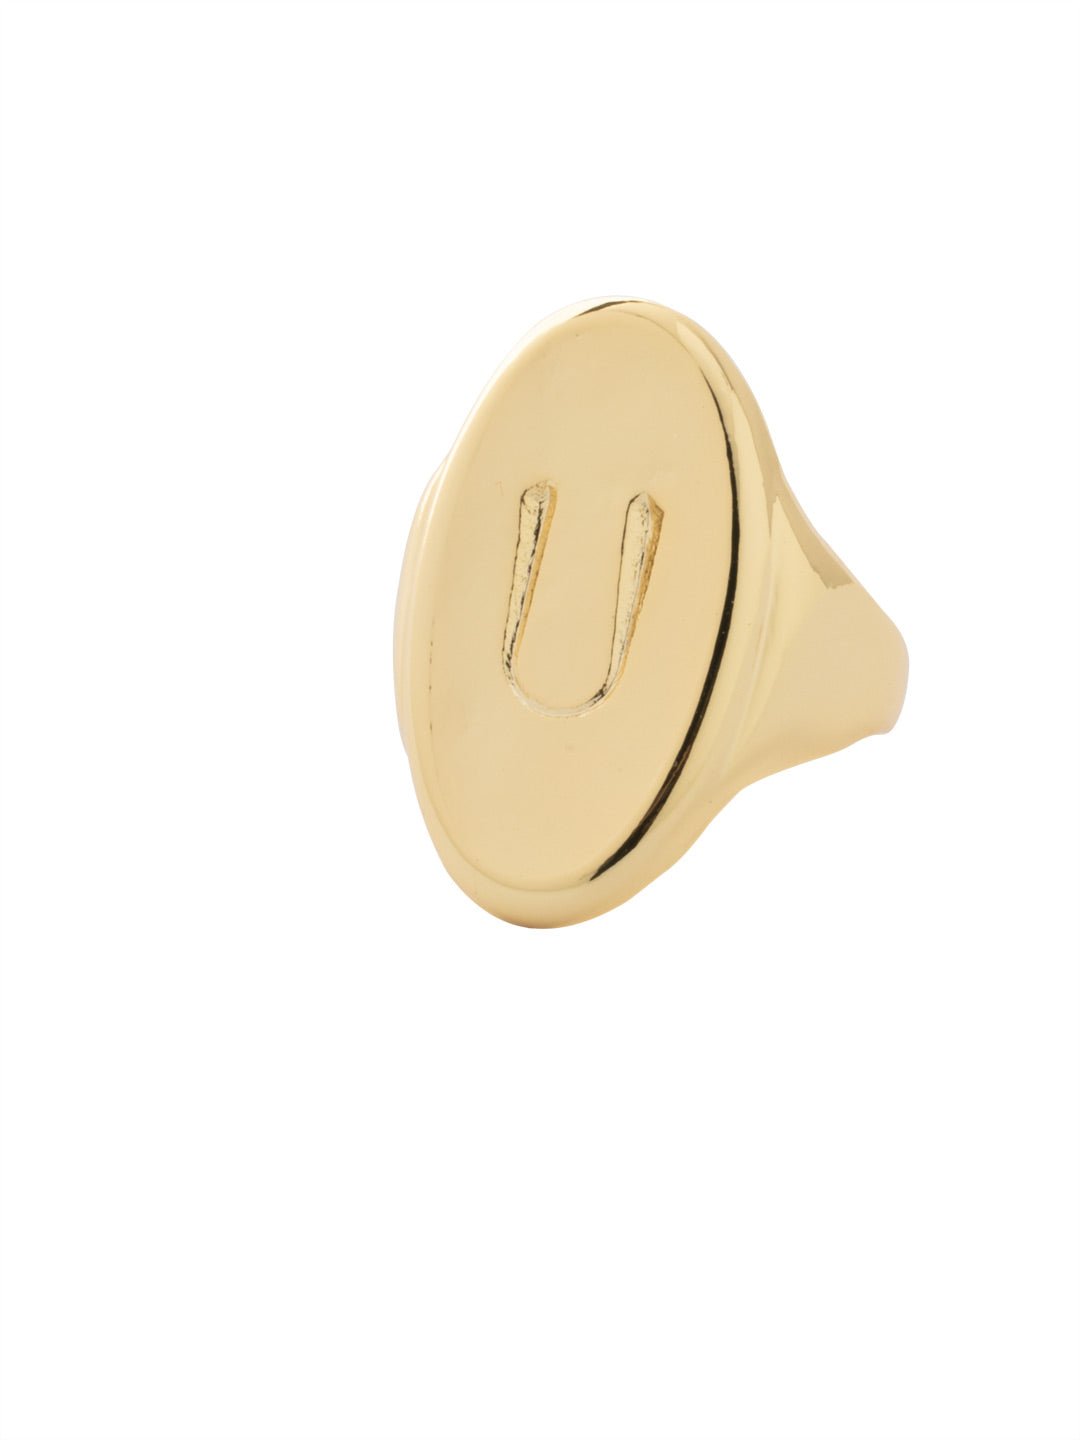 "U" Signet Stacked Ring - RFK50BGMTL - <p>The Signet Statement Ring features a capital letter stamped into an oblong metal disk on an adjustable ring band. From Sorrelli's Bare Metallic collection in our Bright Gold-tone finish.</p>